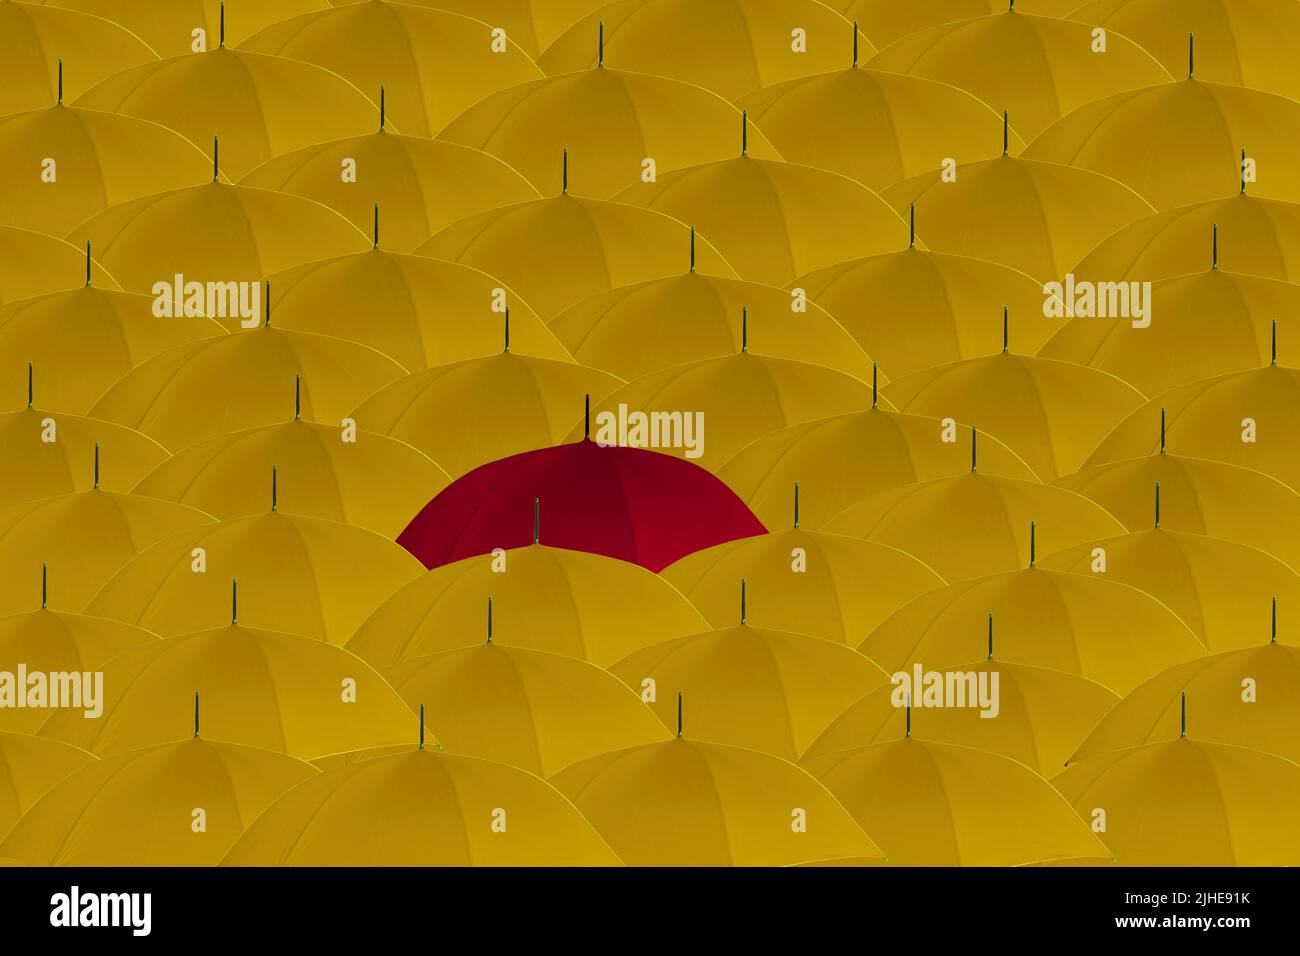 stand out from the crowd odd one out concept crowd of yellow umbrellas one red umbrella standing out Stock Photo